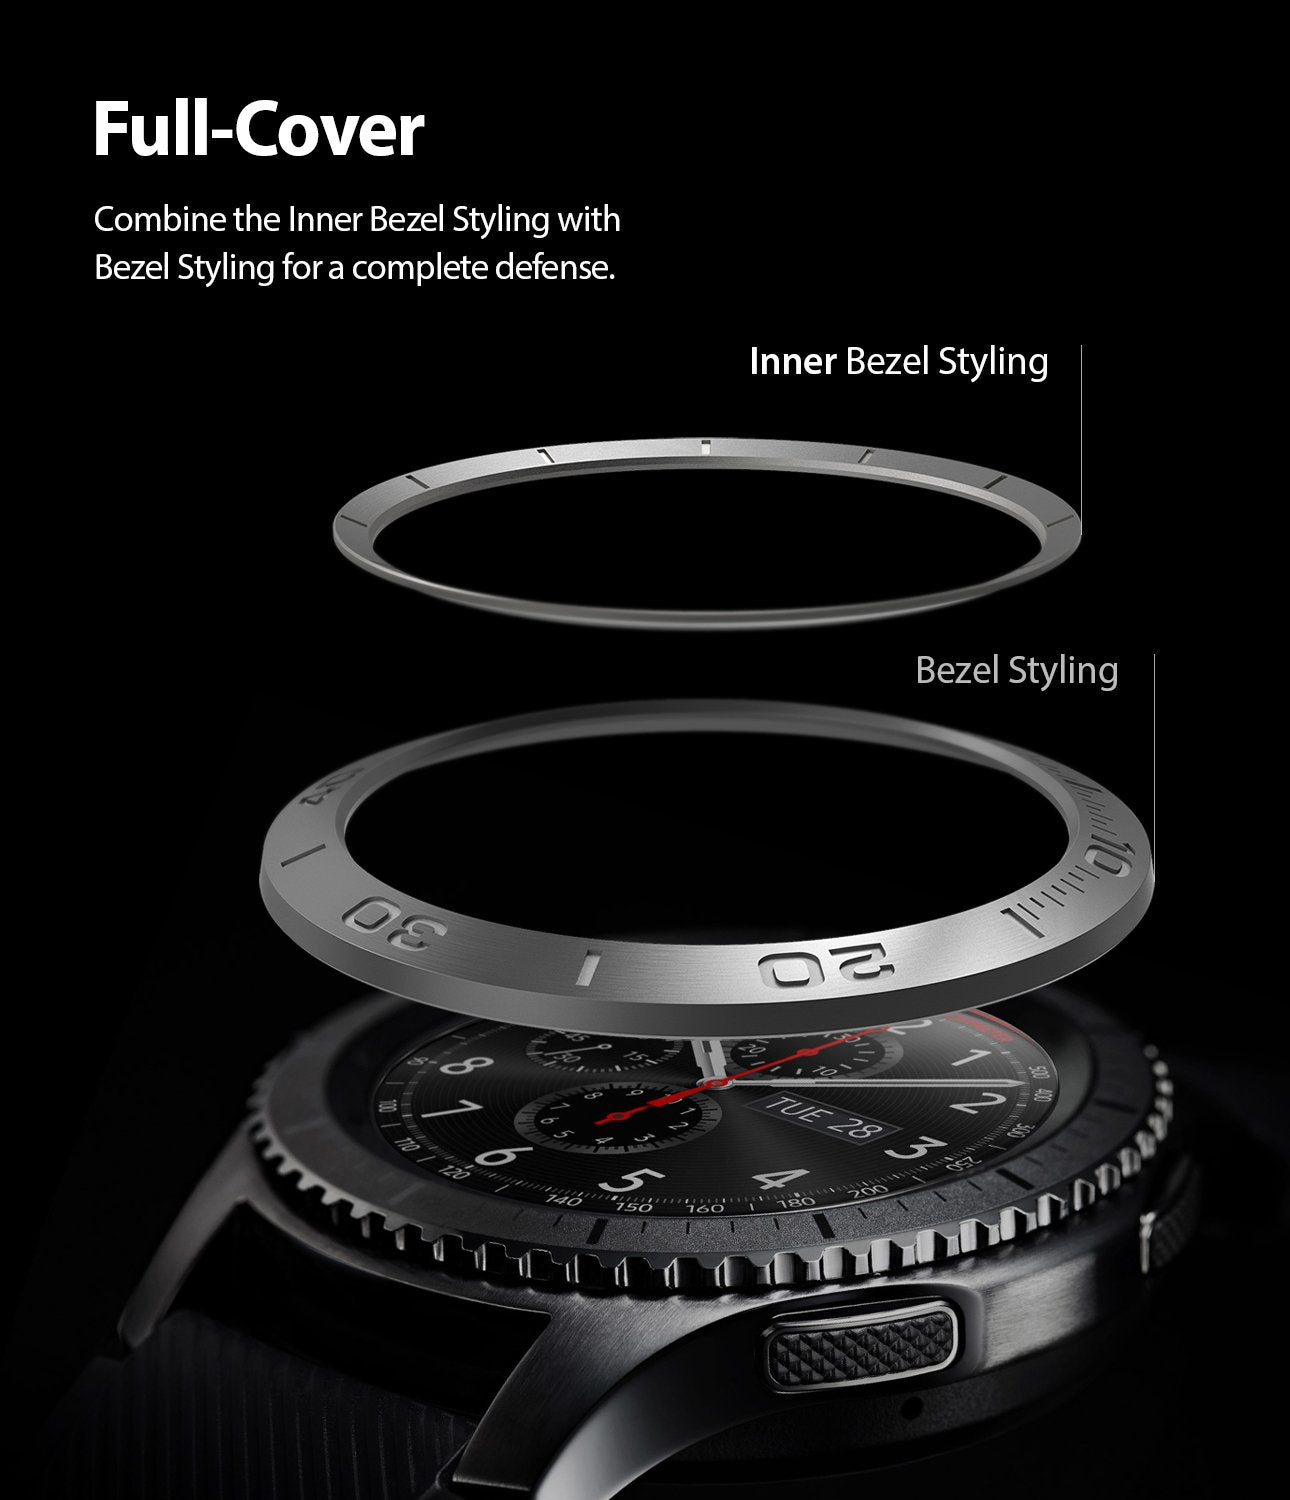 Ringke Inner Bezel Styling for Galaxy Watch 46mm, Gear S3 Frontier, and Gear S3 Classic, GW-46-IN-03, STAINLESS STEEL, full coverage